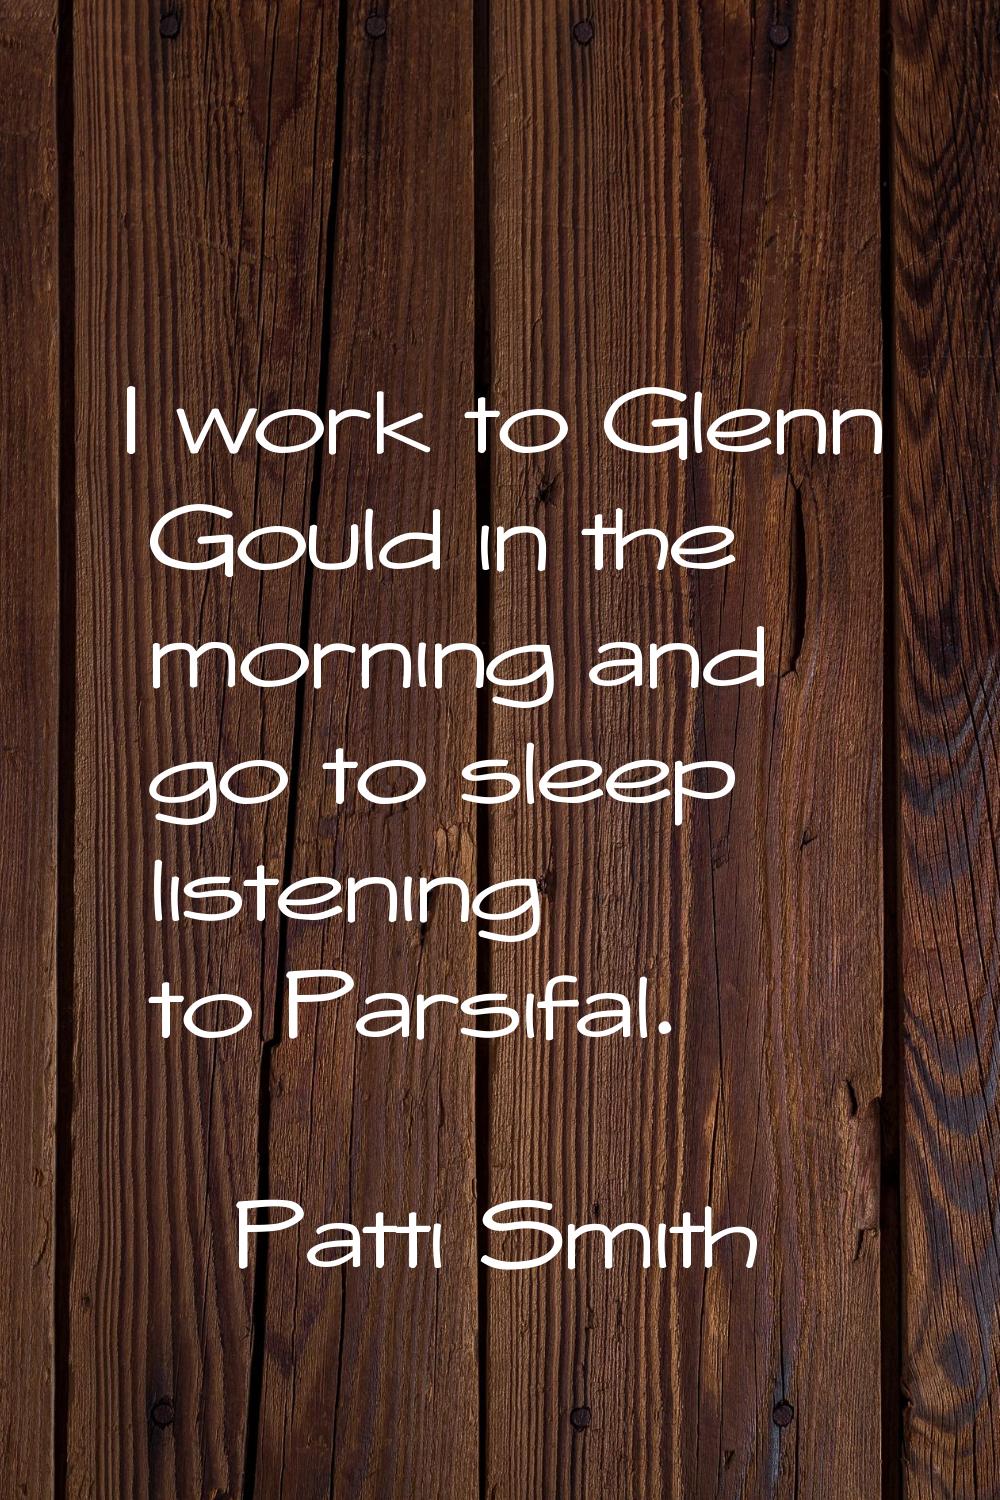 I work to Glenn Gould in the morning and go to sleep listening to Parsifal.